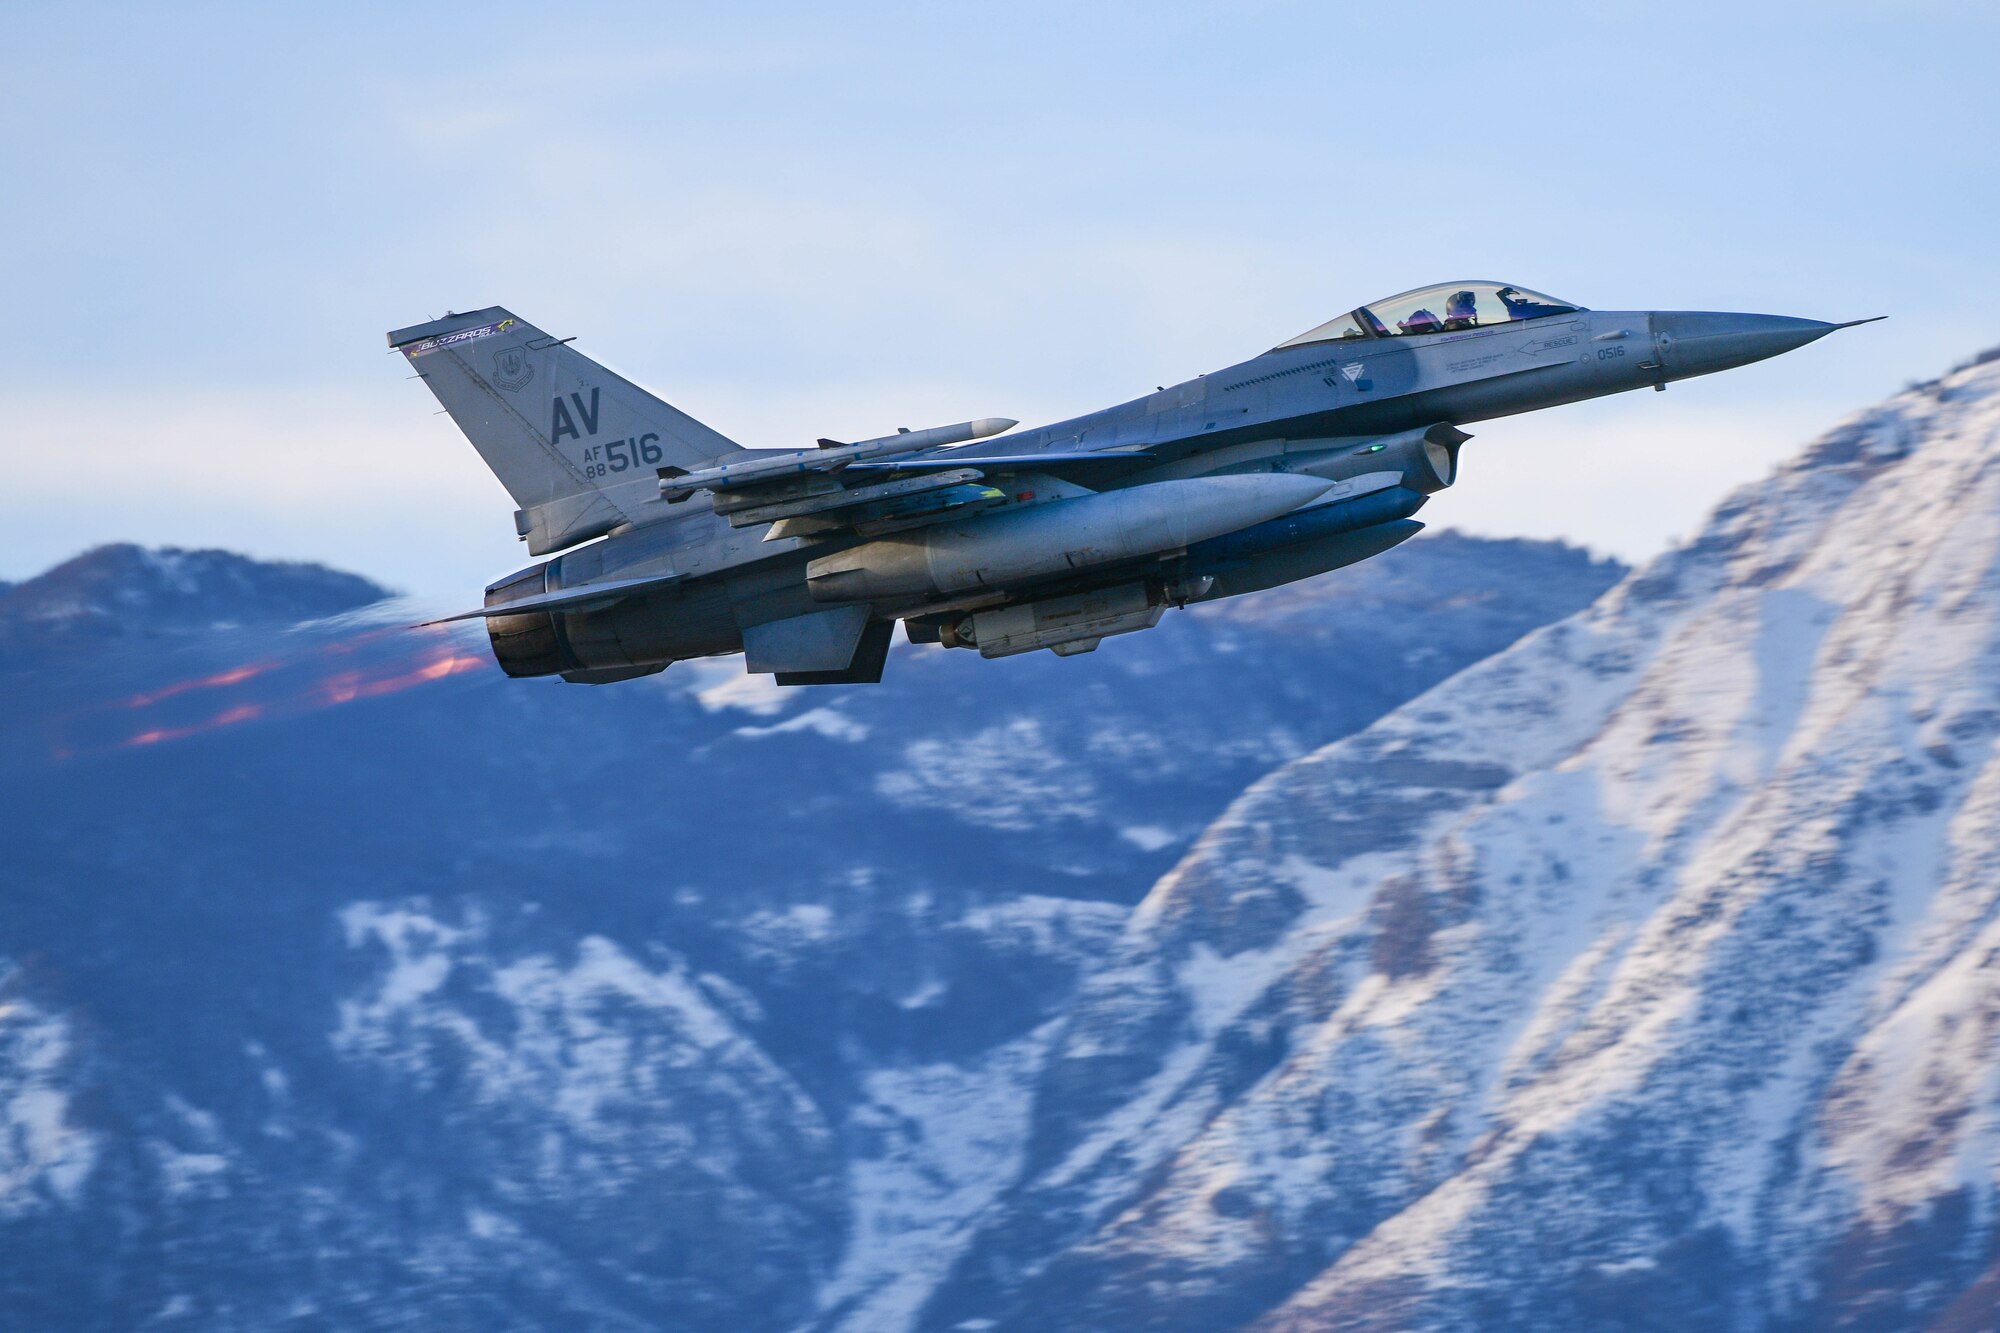 A U.S. Air Force F-16 Fighting Falcon assigned to the 510th Fighter Squadron, takes off at Aviano Air Base, Italy, Nov. 30, 2021. The F-16 is a compact, maneuverable multi-role fighter aircraft and can reach speeds of 1,500 mph. The 31st Fighter Wing boasts a diverse combat mission set including the 555th and 510th Fighter Squadrons. (U.S. Air Force photo by Senior Airman Brooke Moeder)